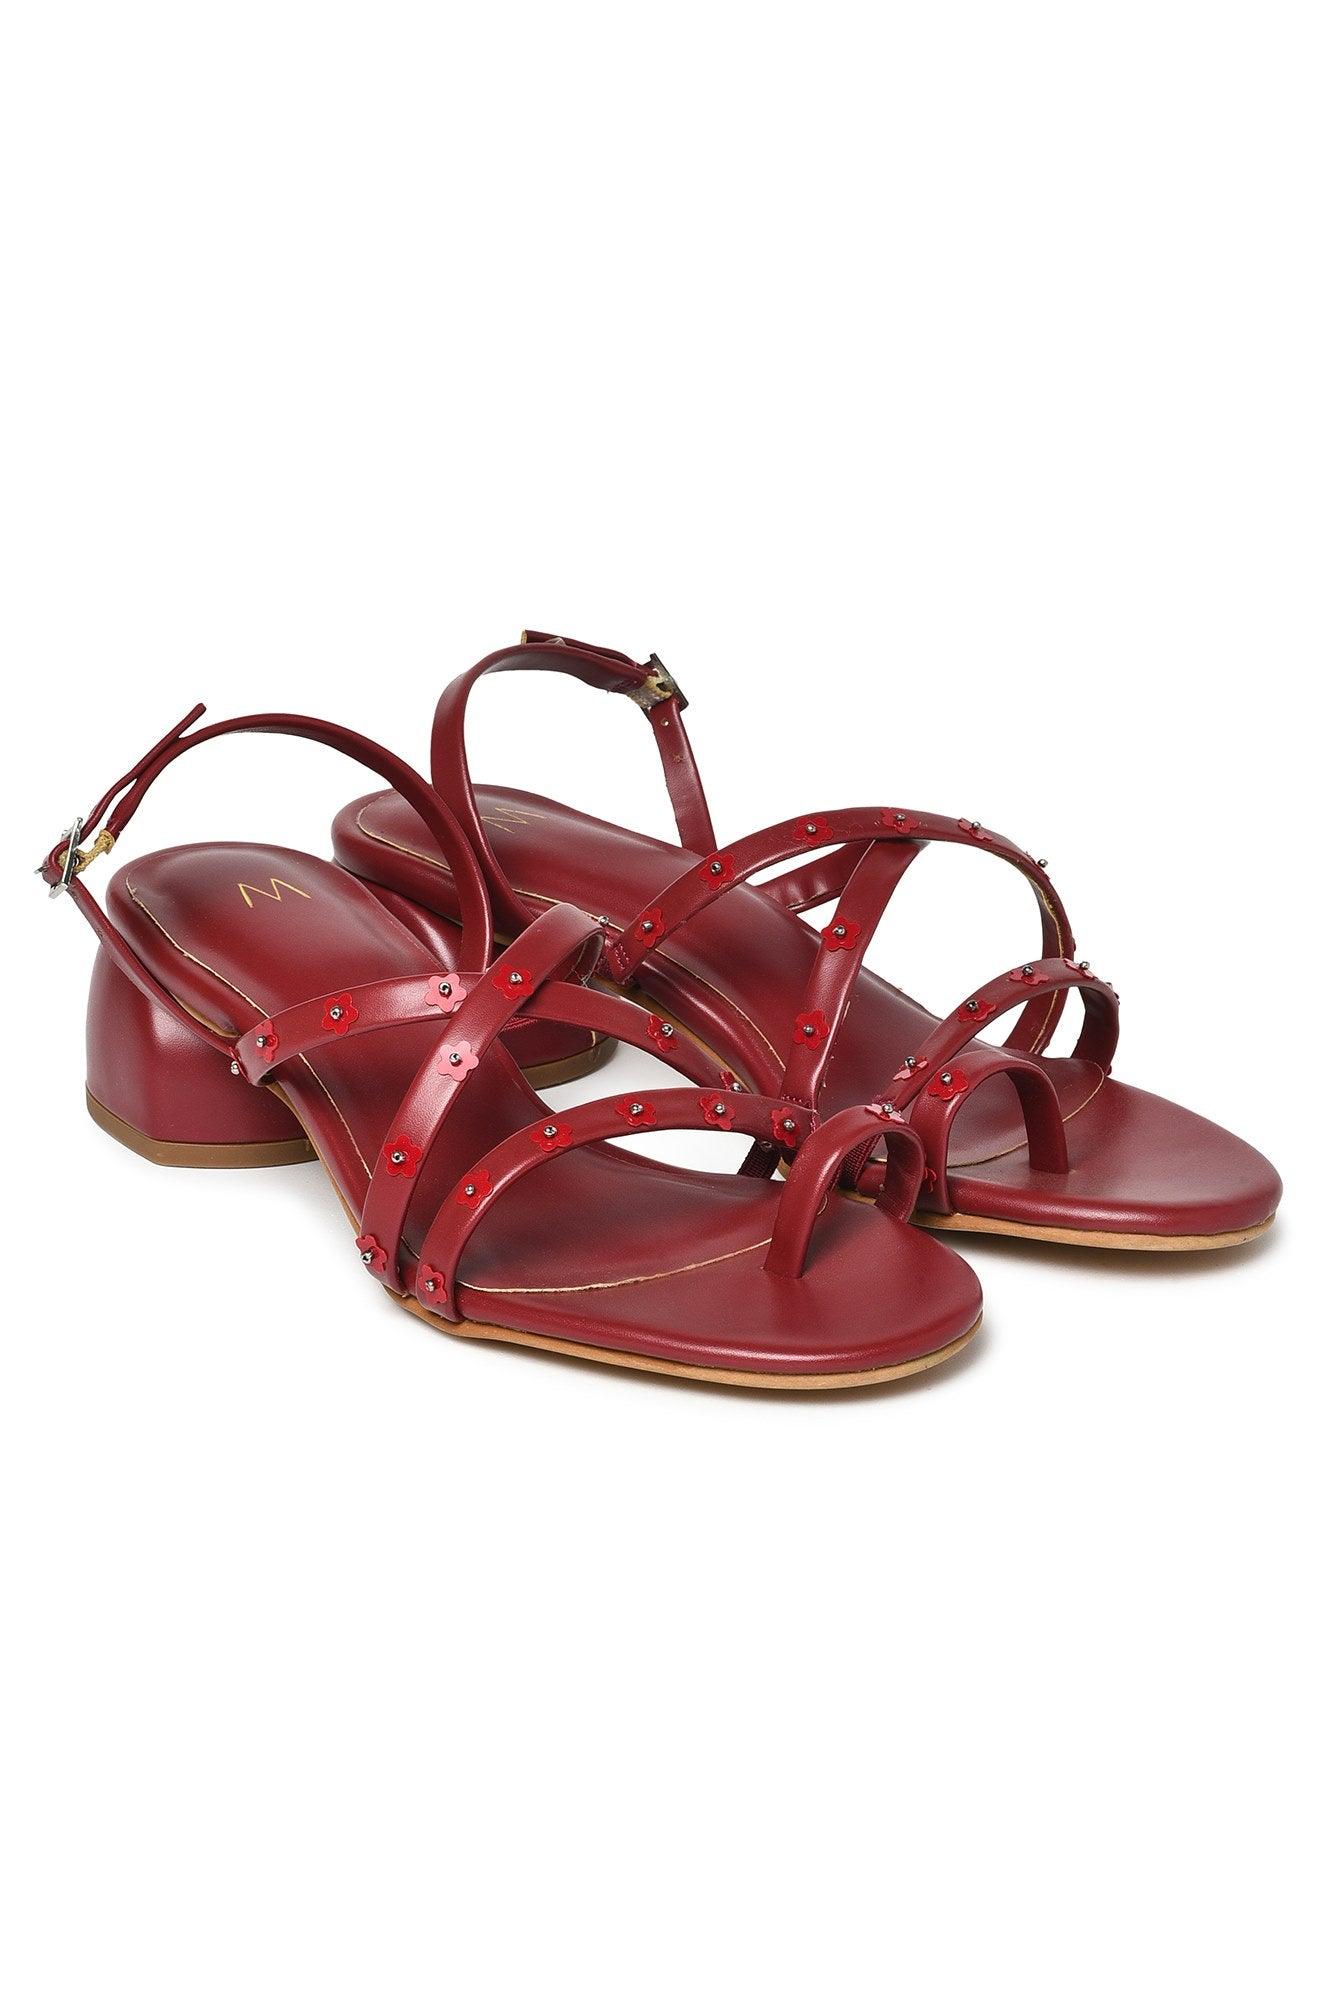 W Embroidered Maroon Round Toe Block - wforwoman